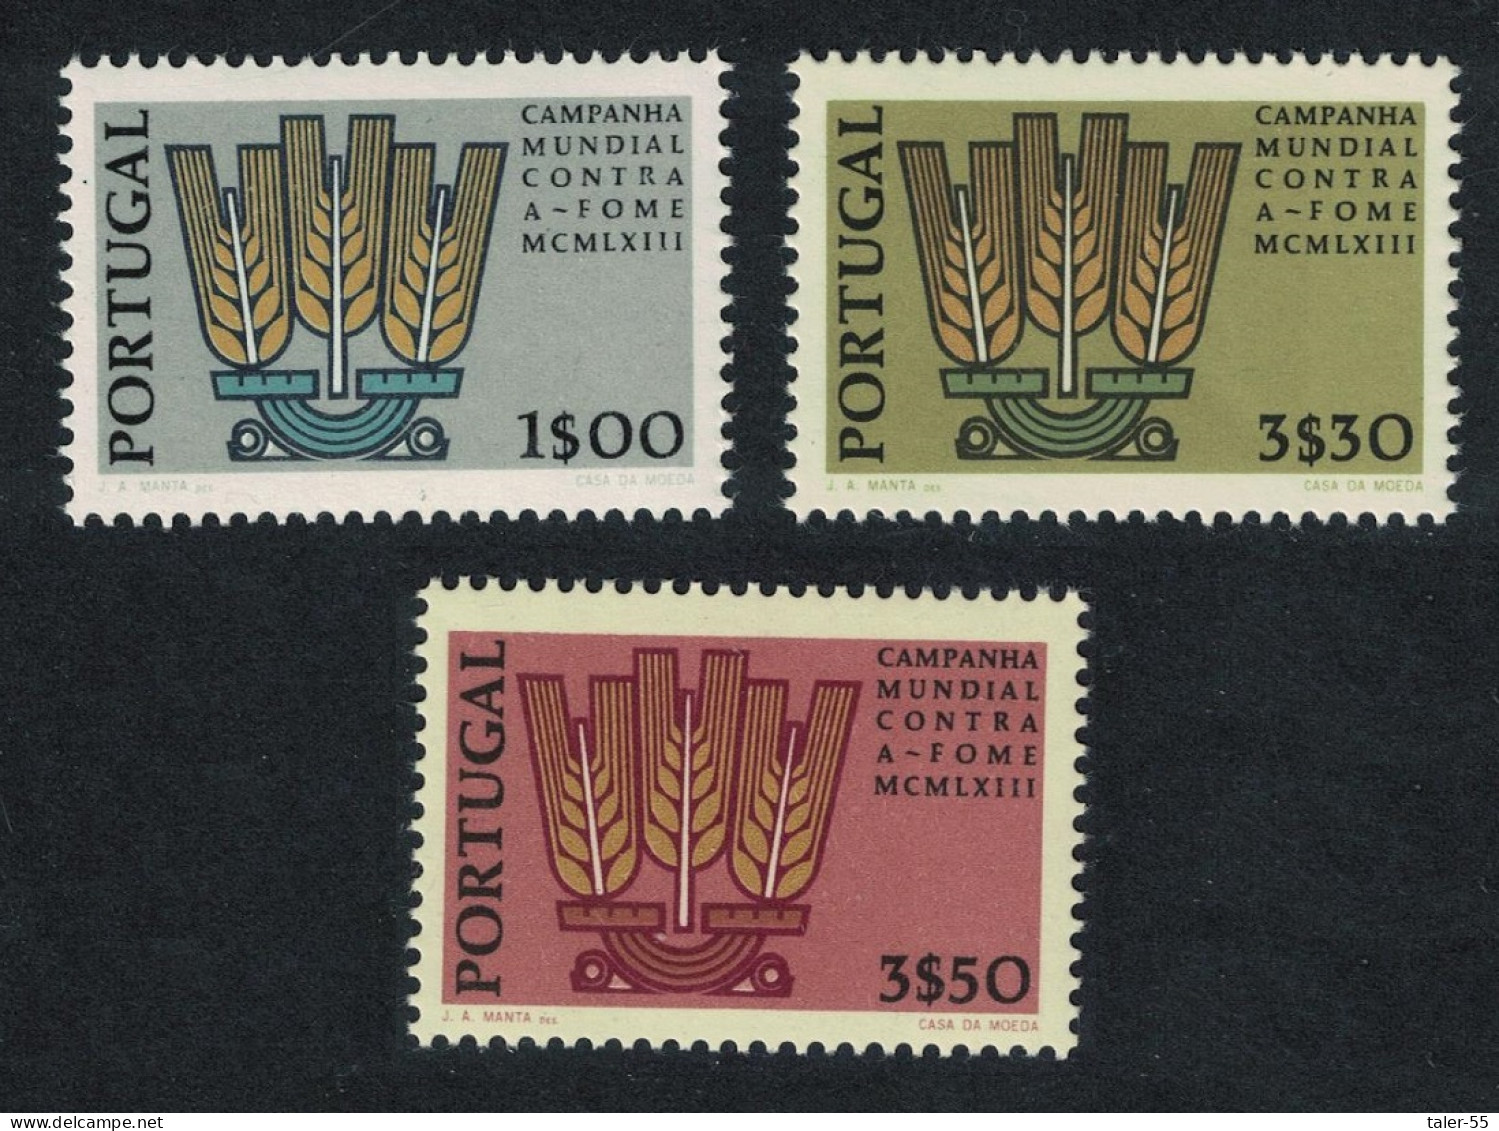 Portugal Freedom From Hunger 3v 1963 MNH SG#1221-1223 - Unused Stamps